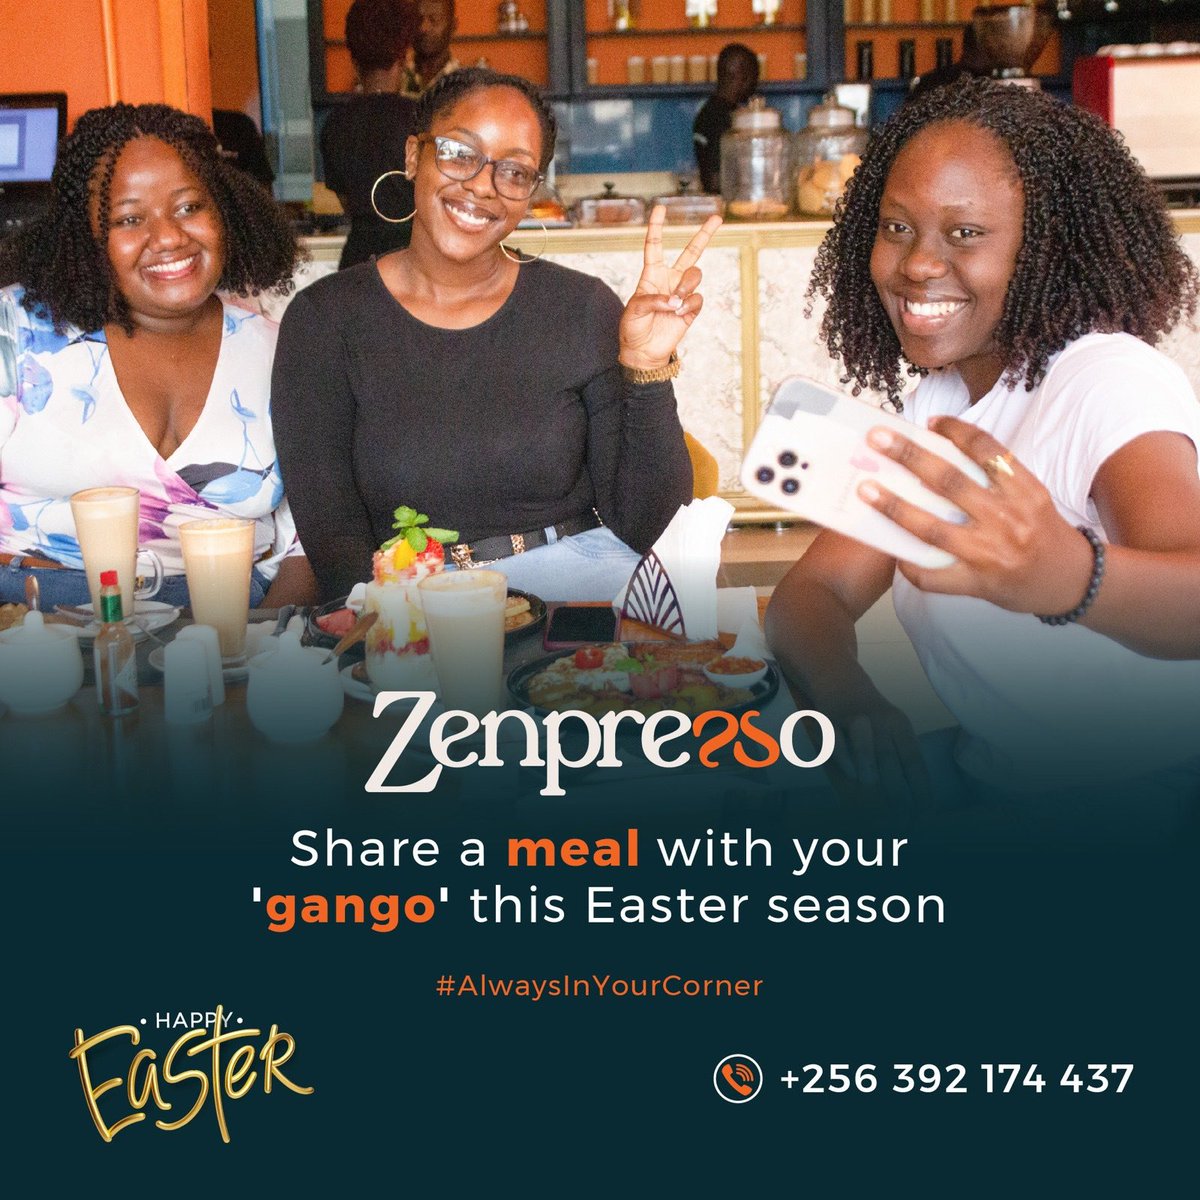 Friends make everything better. Catch up with your pals and get the latest kb over a ZenPresso meal this Easter. #AlwaysInYourCorner 🤩

#FeaturedPost #FeatureByZenpresso